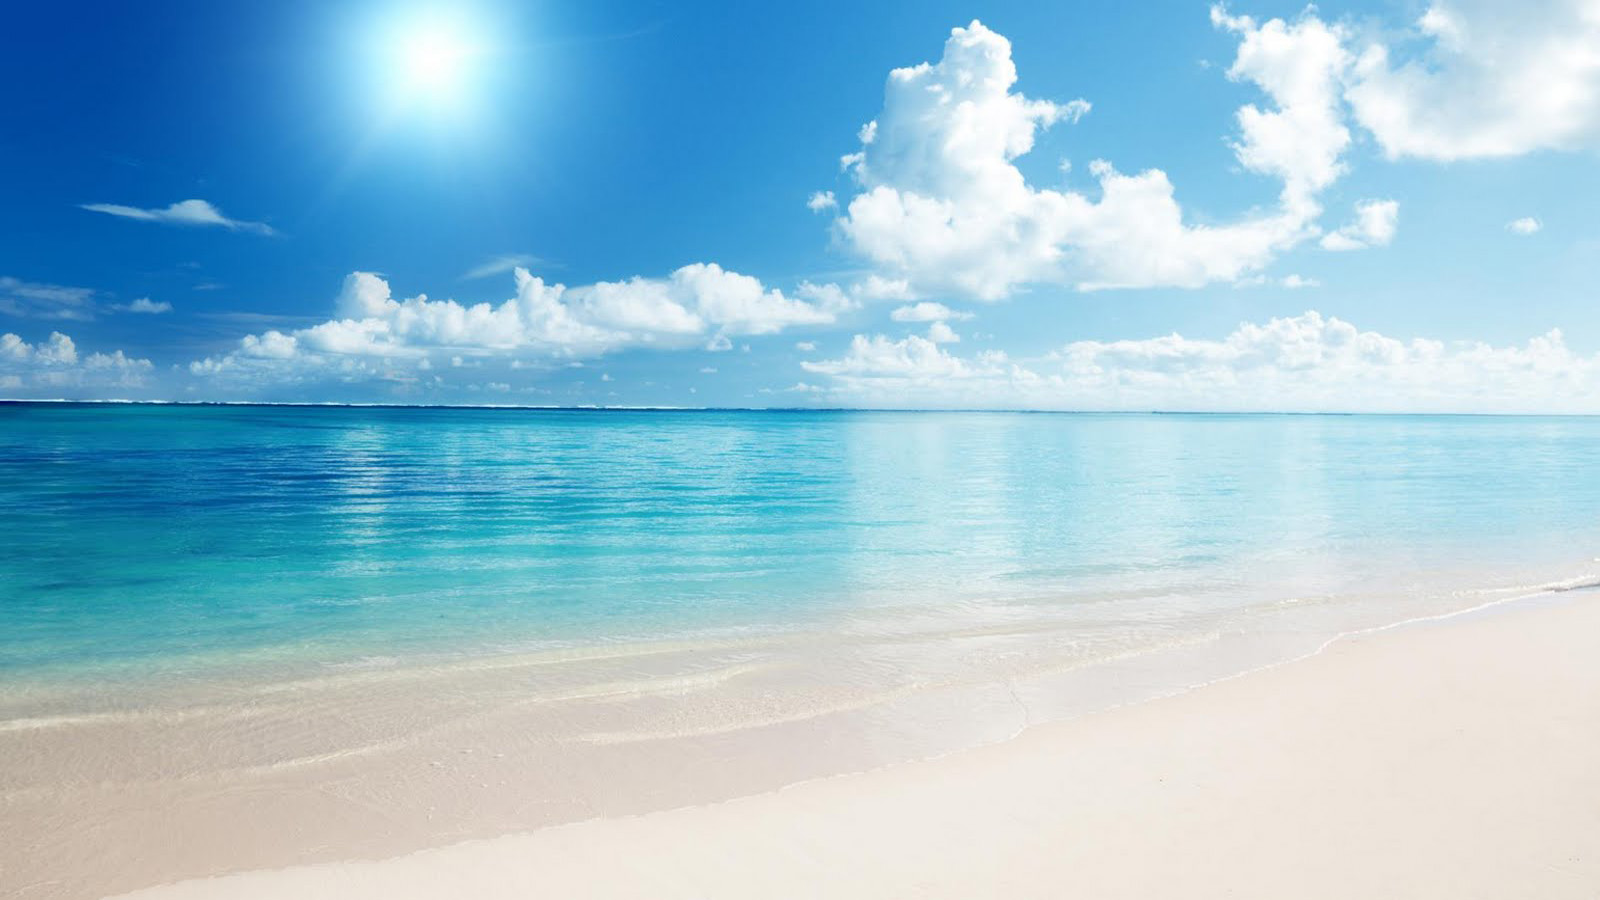 203489 Wallpapers in Category Beach Wallpaper   Page 2